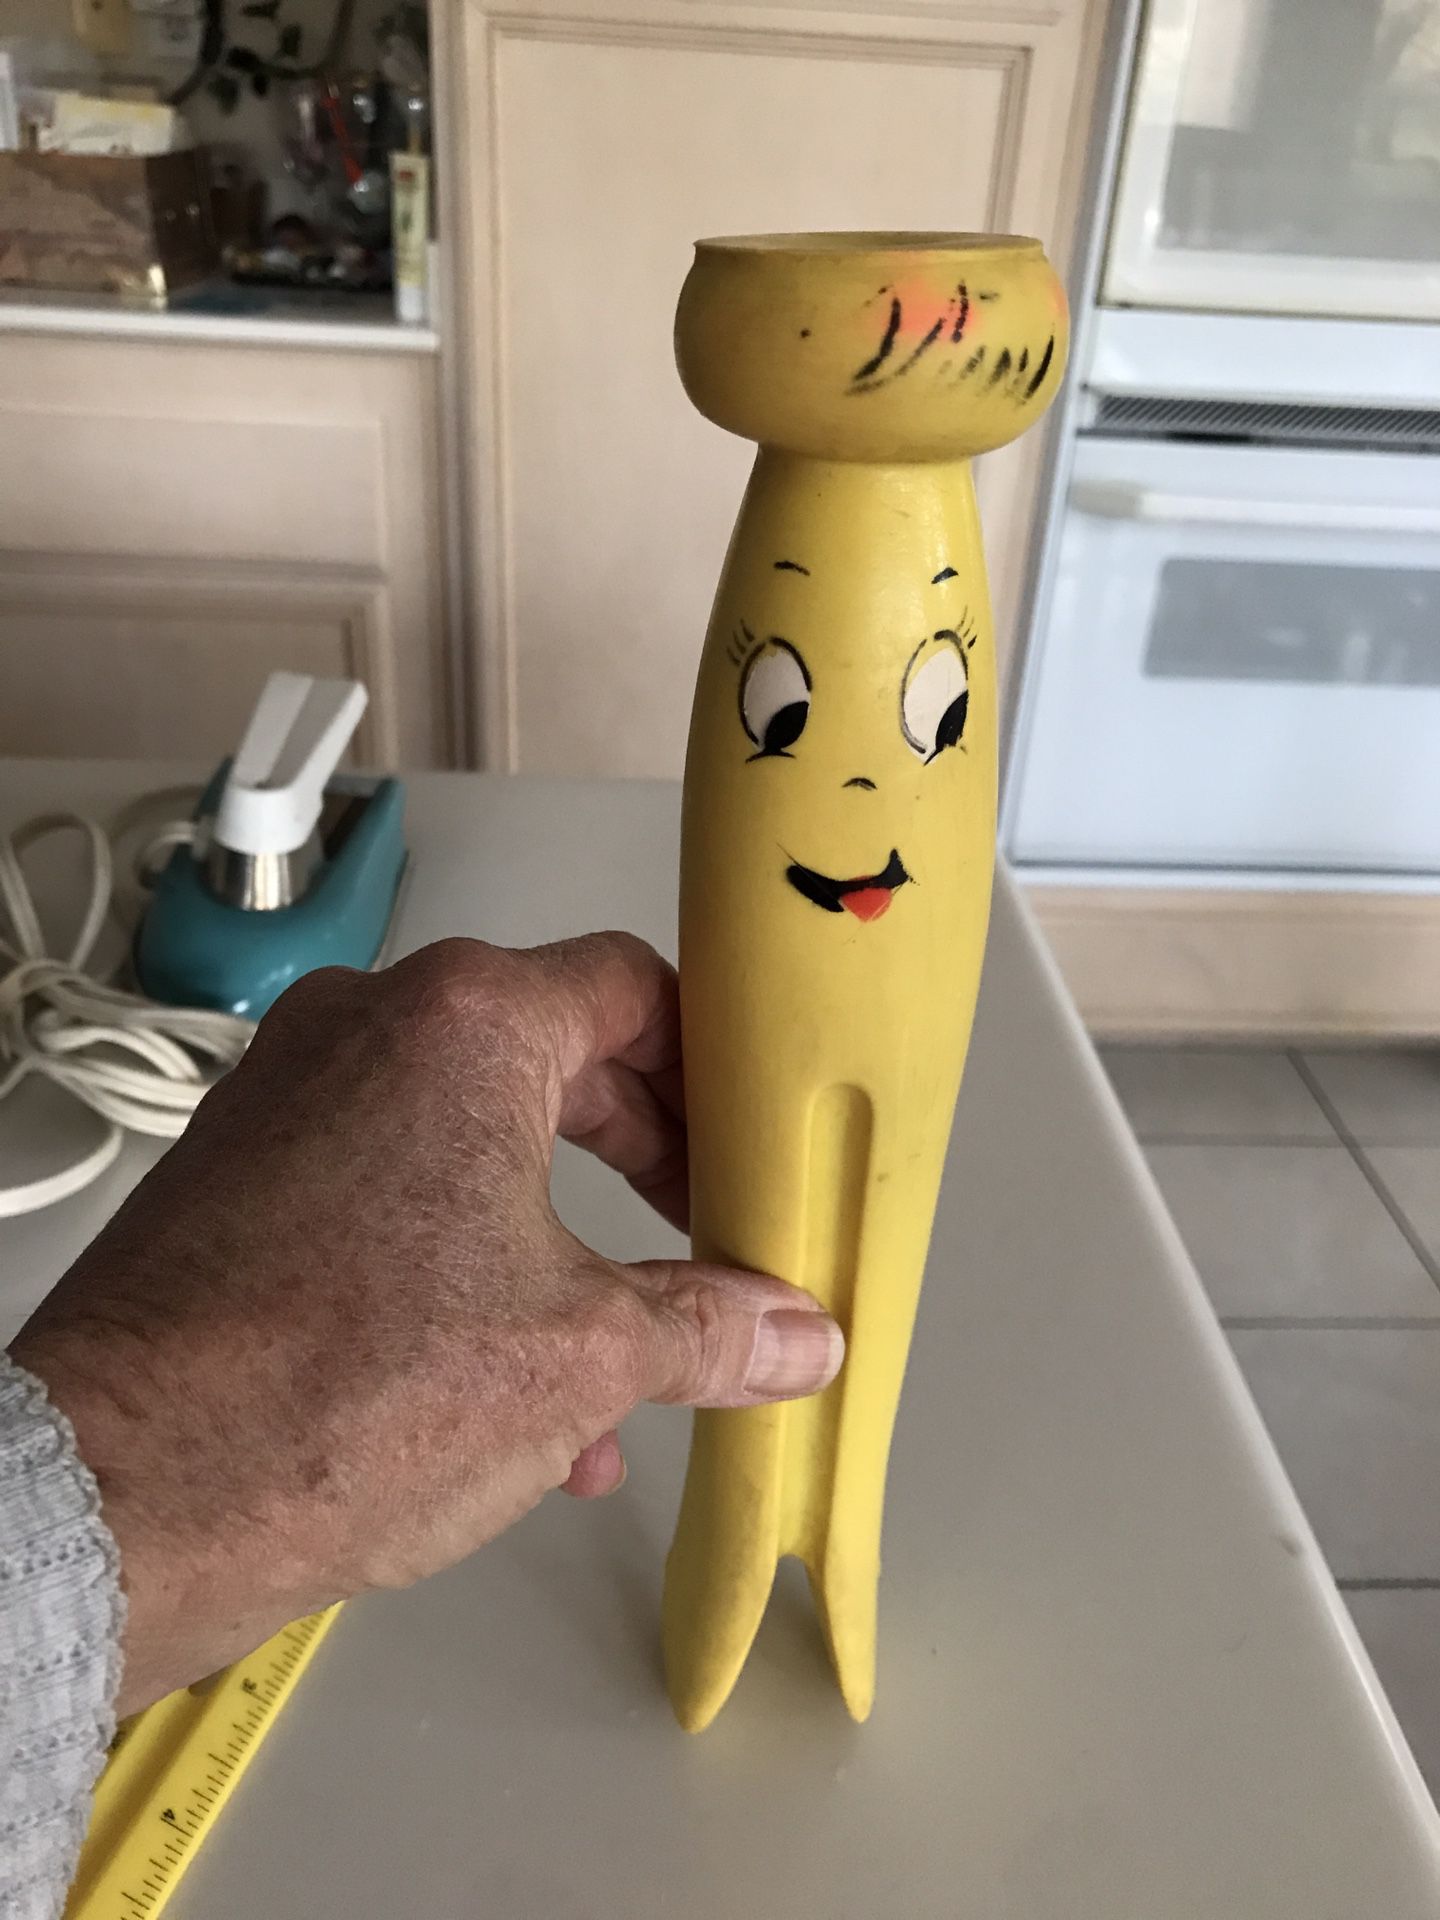 1960s, Clothes Pin, Squeaky Toy, Alan Jay squeaky, clothes pin toy, squeaky toys vintage, clothes pin toy with smiley face